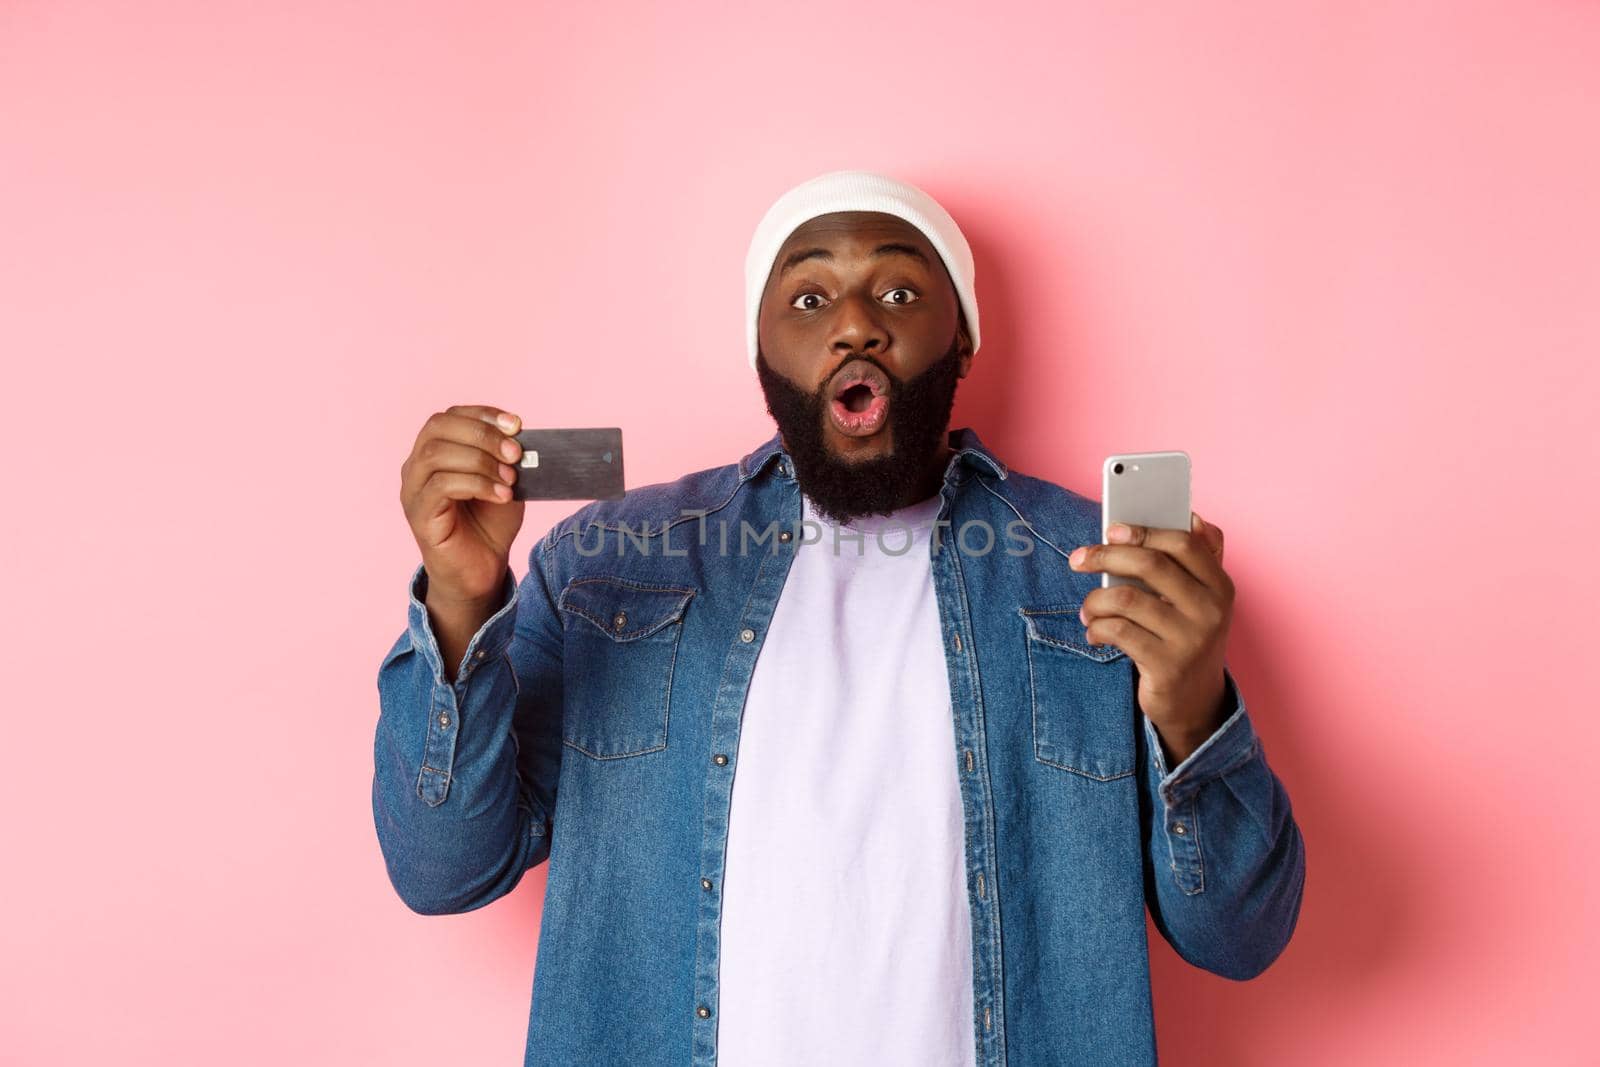 Online shopping. Excited Black man showing credit card, using smartphone, staring at camera amazed, standing over pink background.